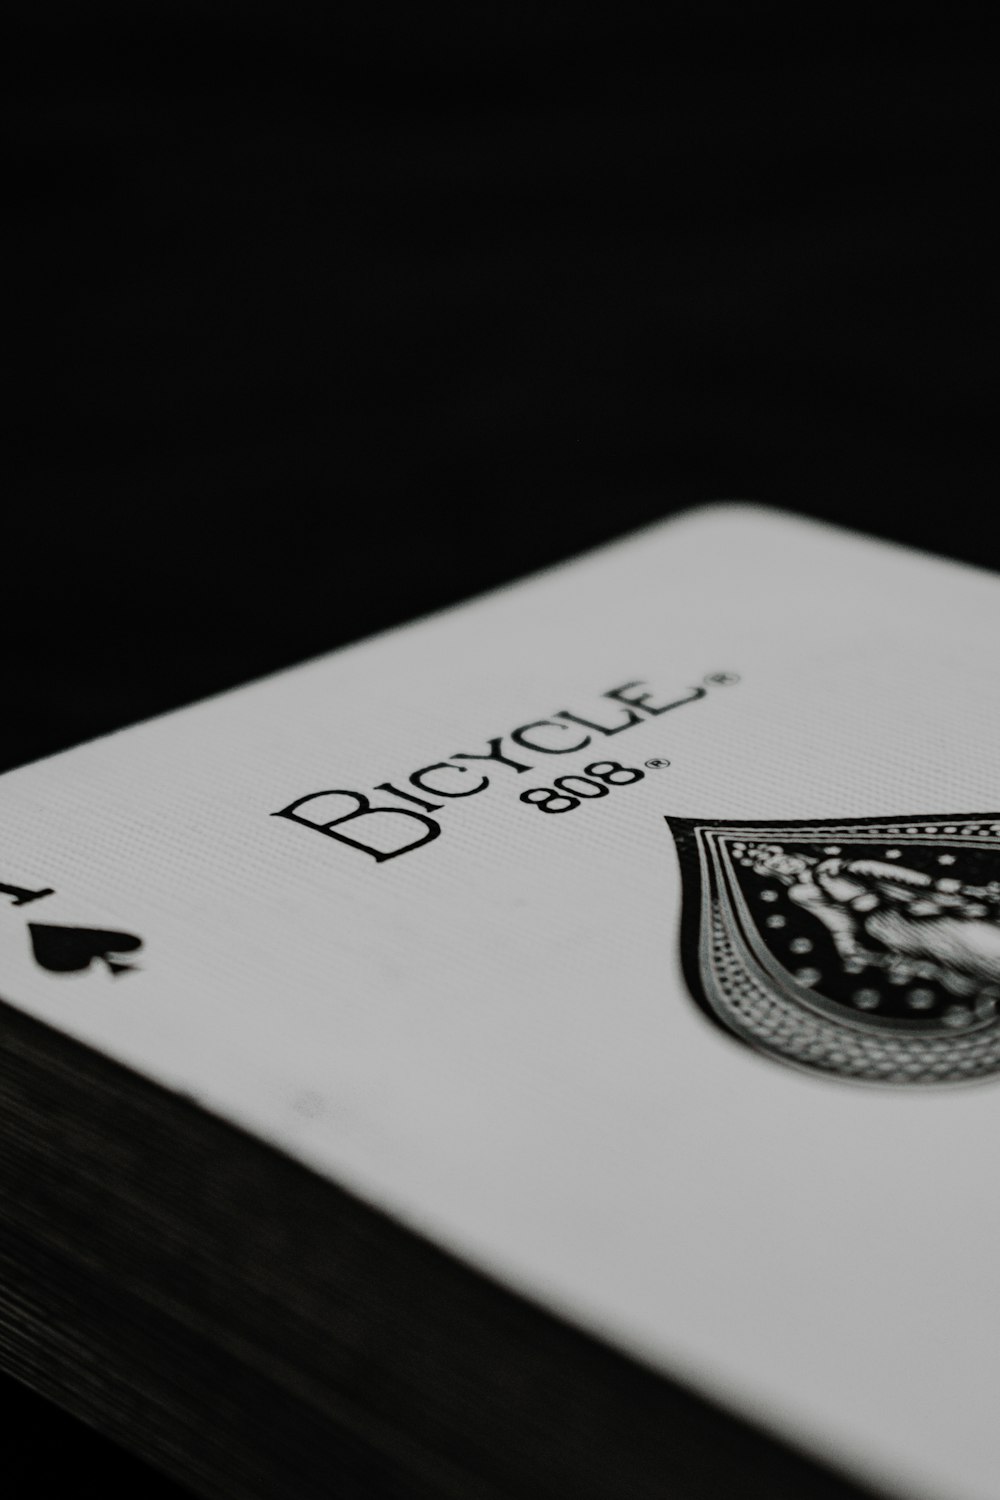 ace of spade playing card